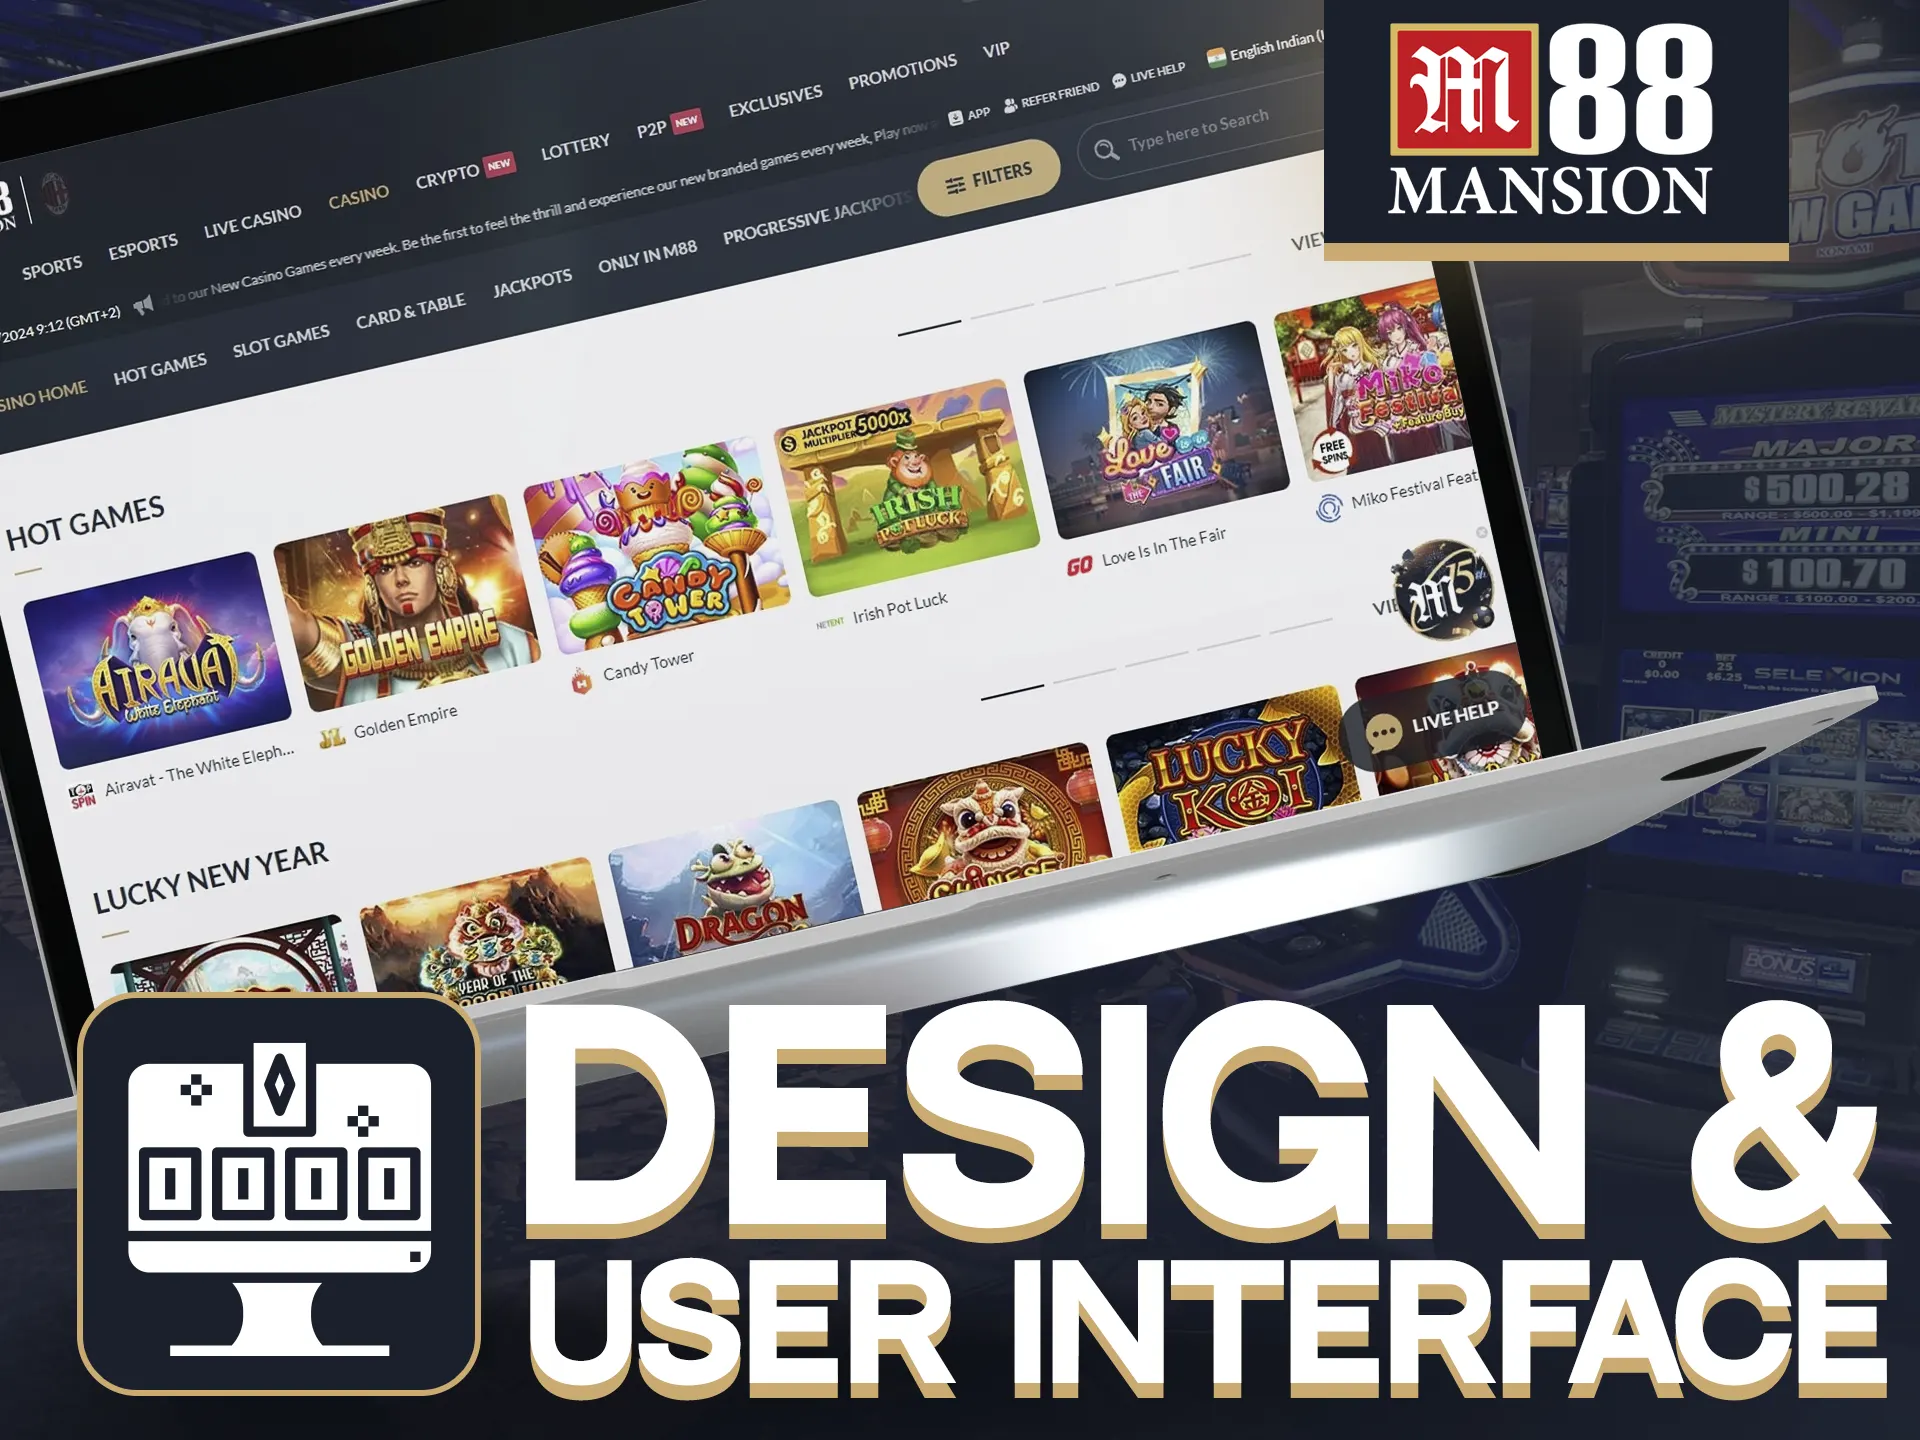 M88 Casino features user-friendly design and navigation.